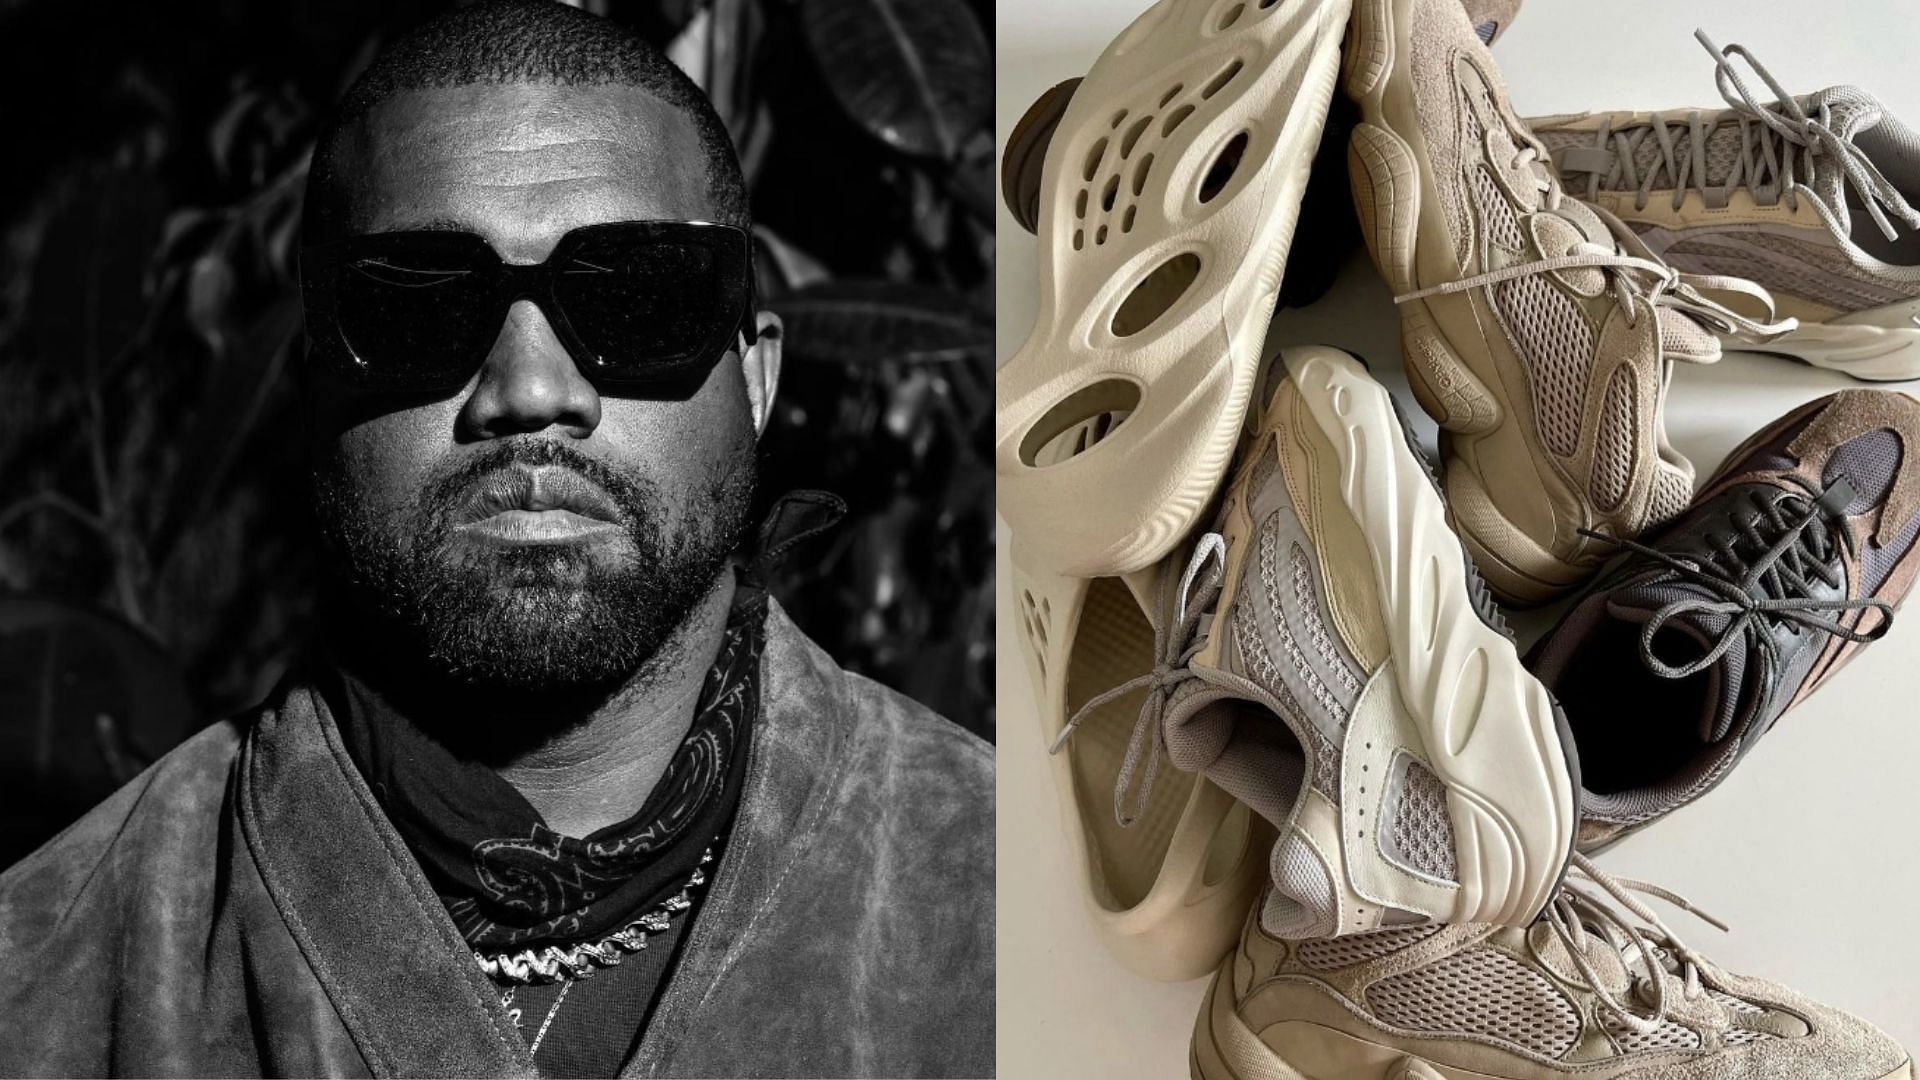 Yeezy inventory plans Will remaining Adidas Yeezy sneakers be sold in